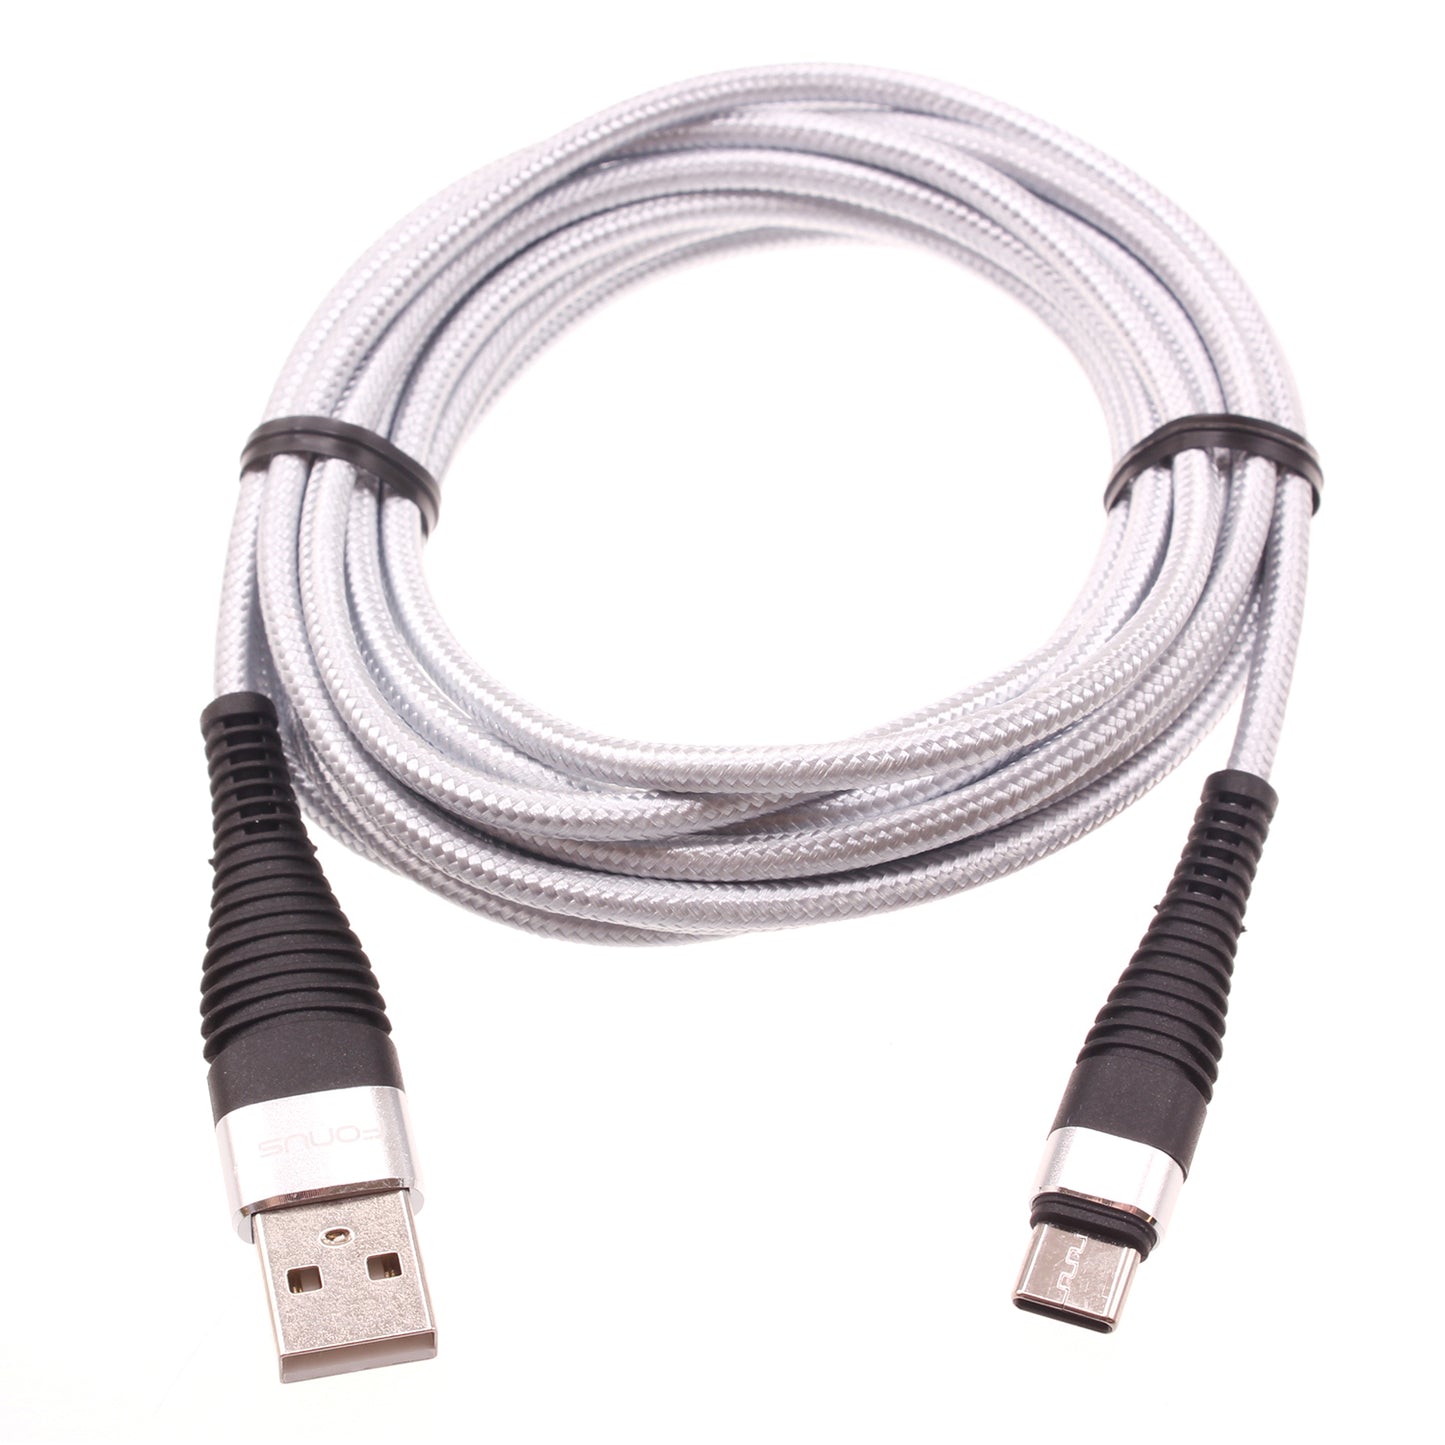 6ft and 10ft Long USB-C Cables, Braided Data Sync Power Wire TYPE-C Cord Fast Charge - NWY70